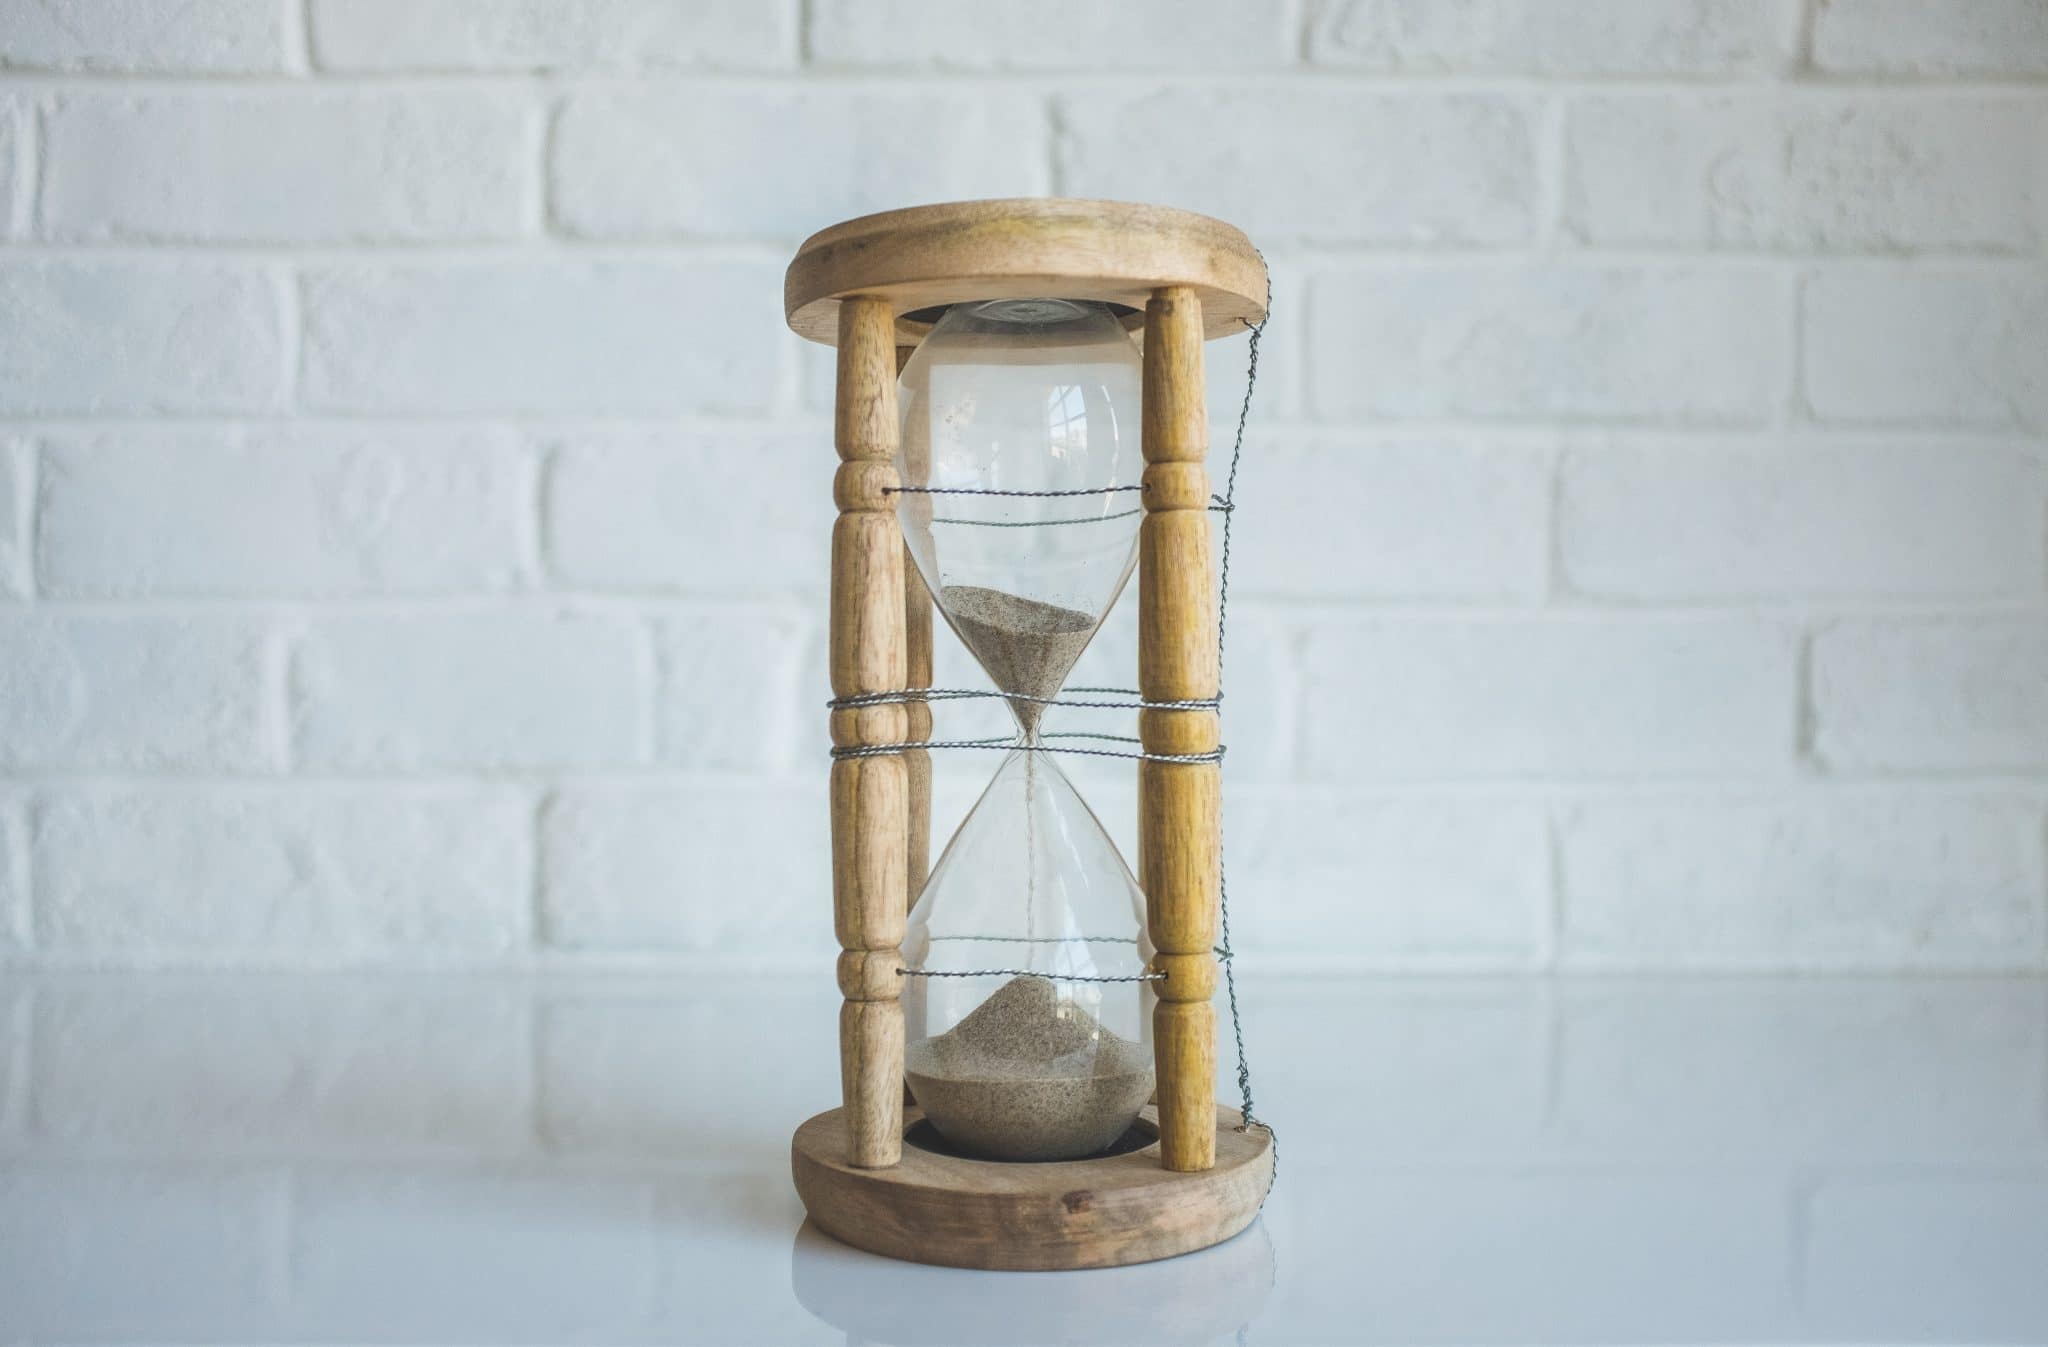 Hourglass - how will you spend your time?